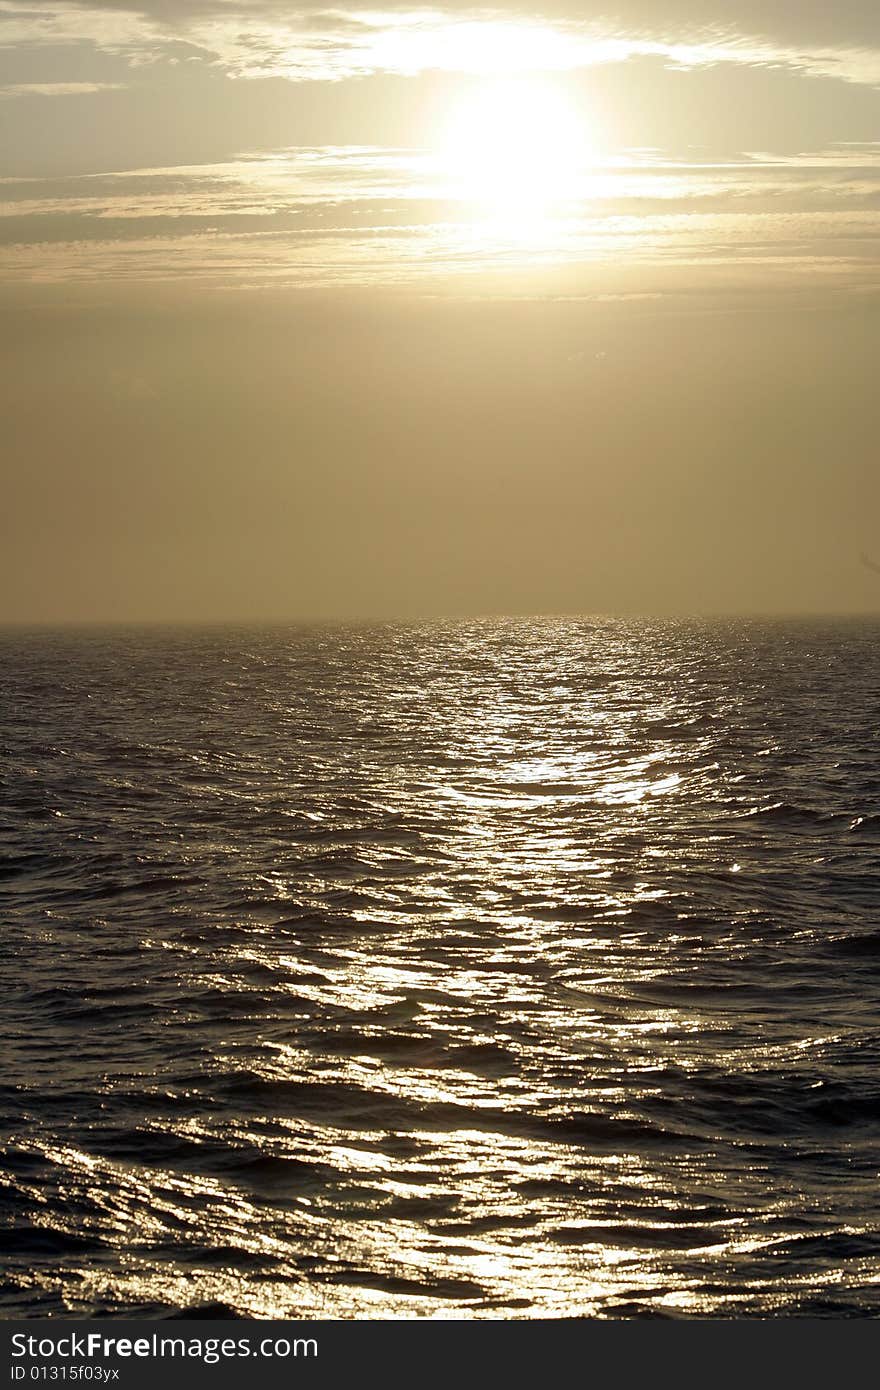 The ocean at dusk, the sun peaking through the clouds